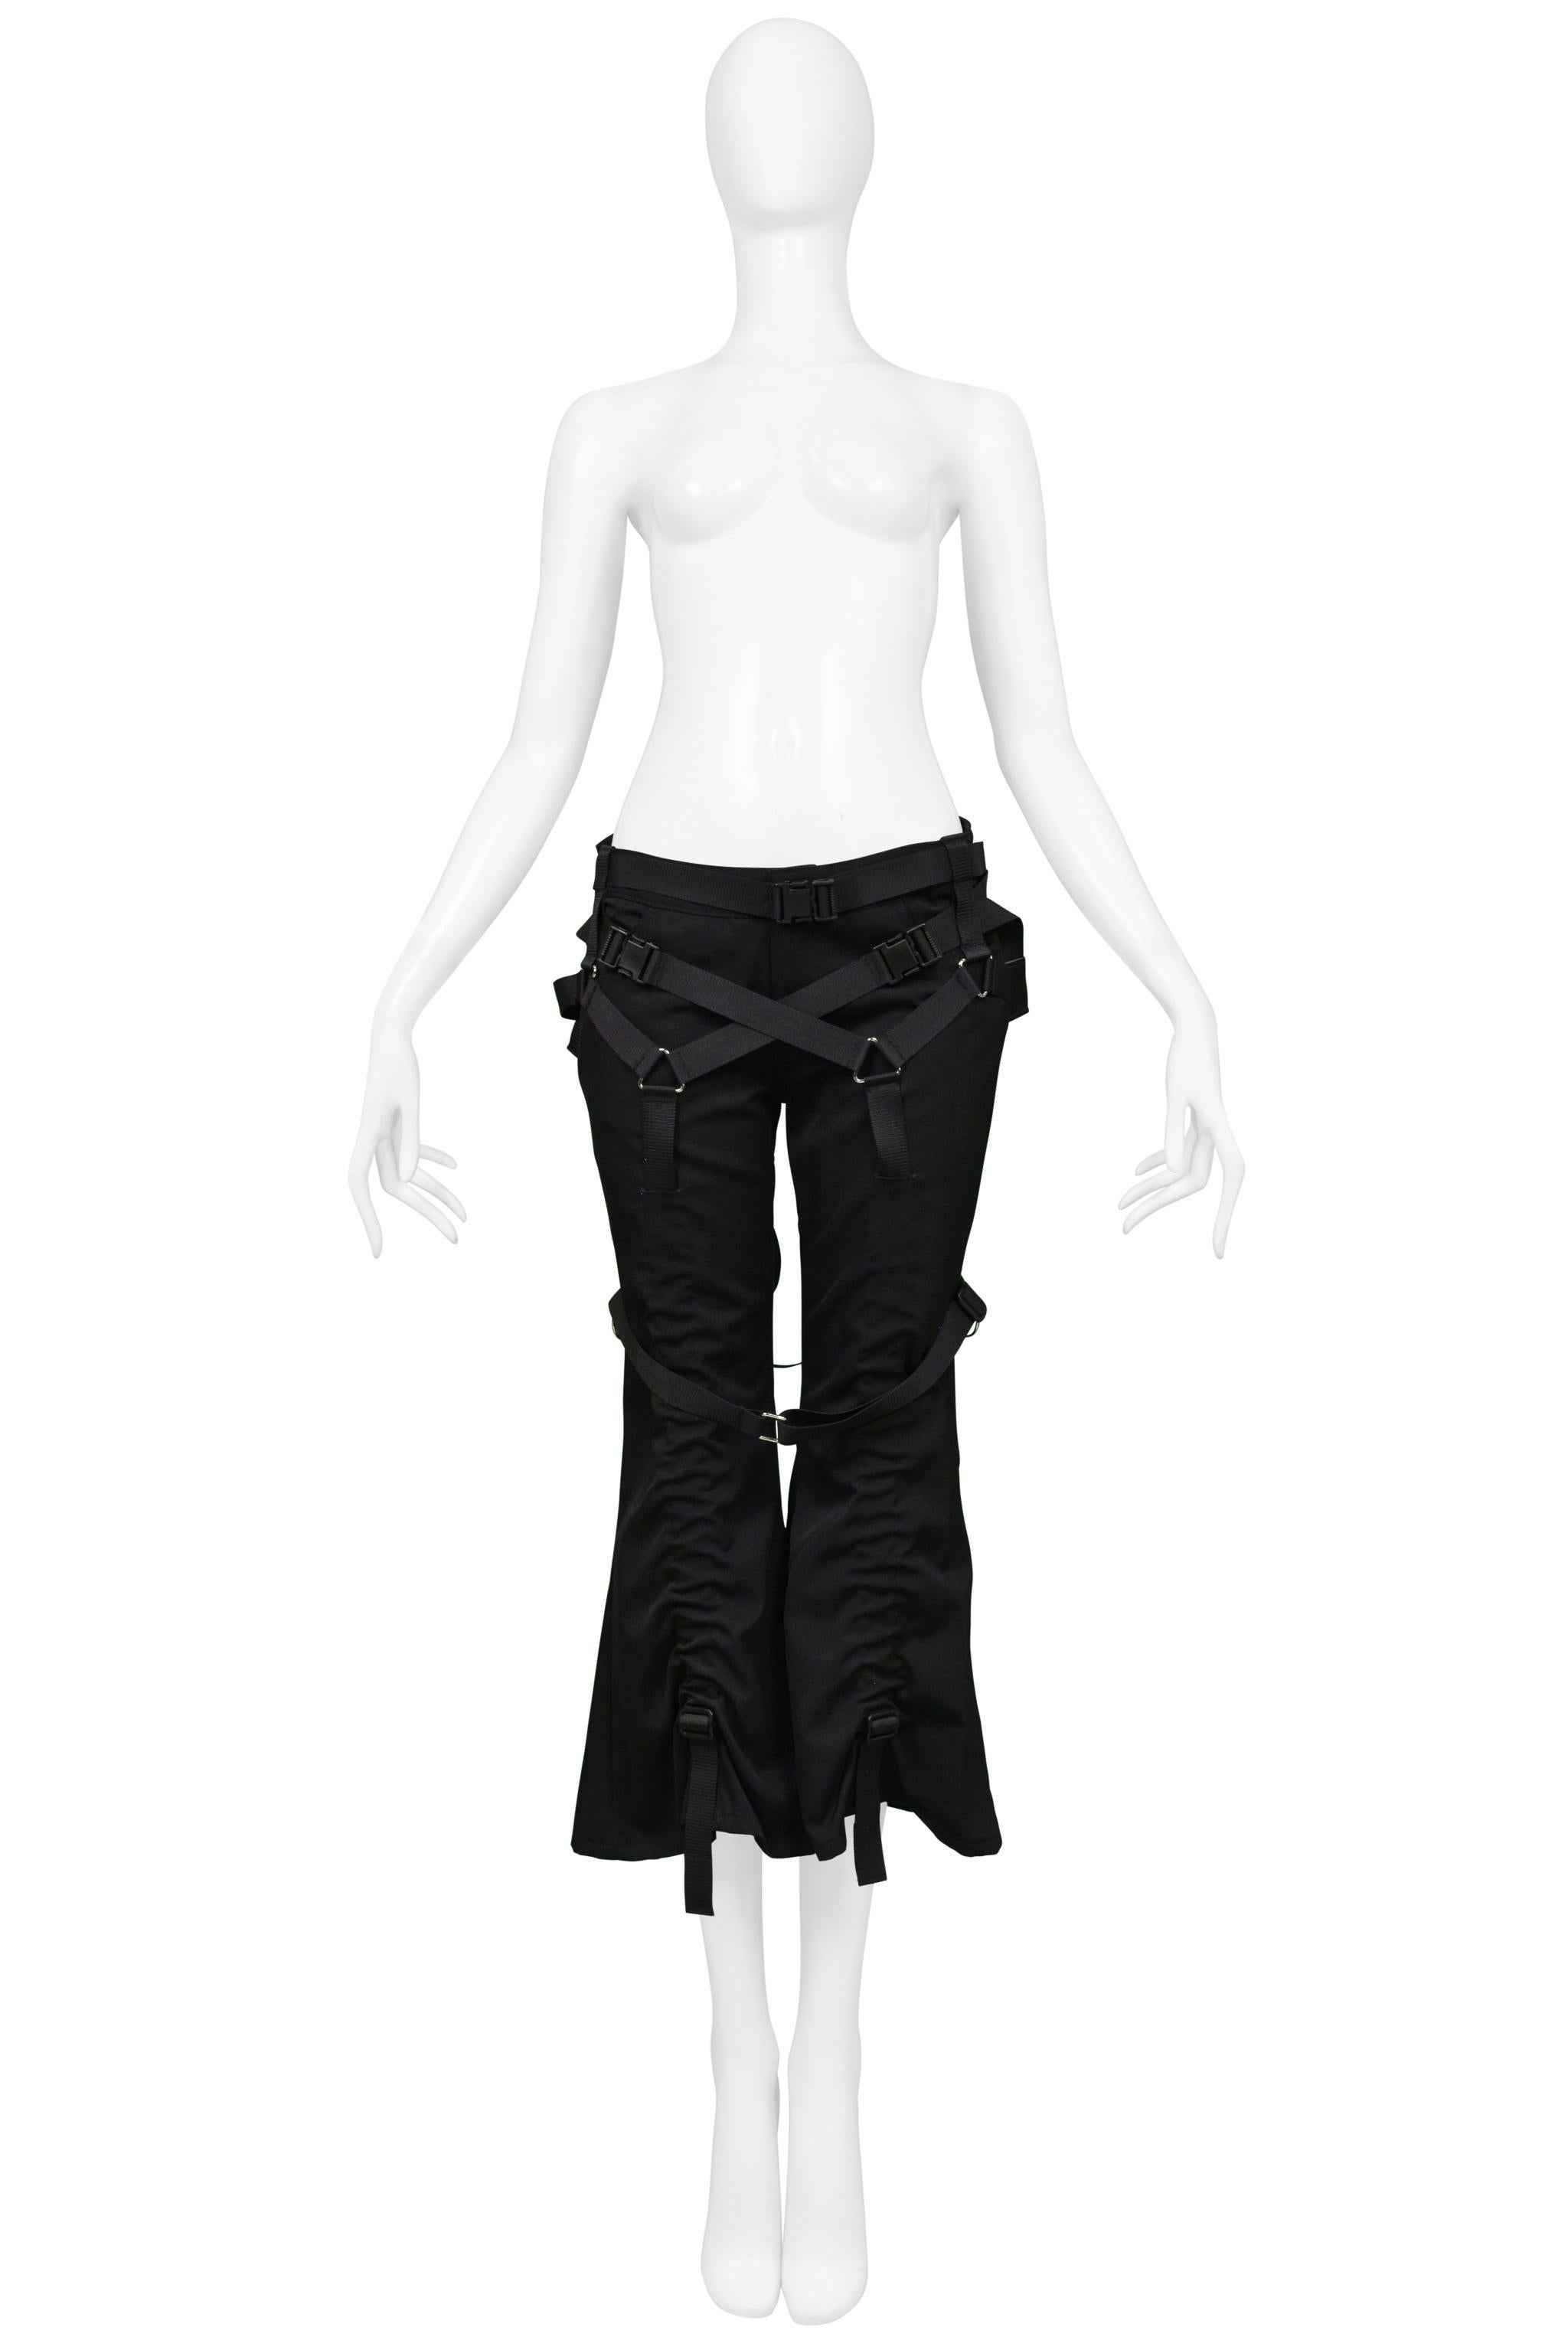 Resurrection Vintage is excited to offer a vintage Junya Watanabe for Comme des Garcons black wrap parachute pants featuring an adjustable snap belt, front pockets and, parachute straps. 

Size: Small
Cotton
2003 Collection
Excellent Vintage